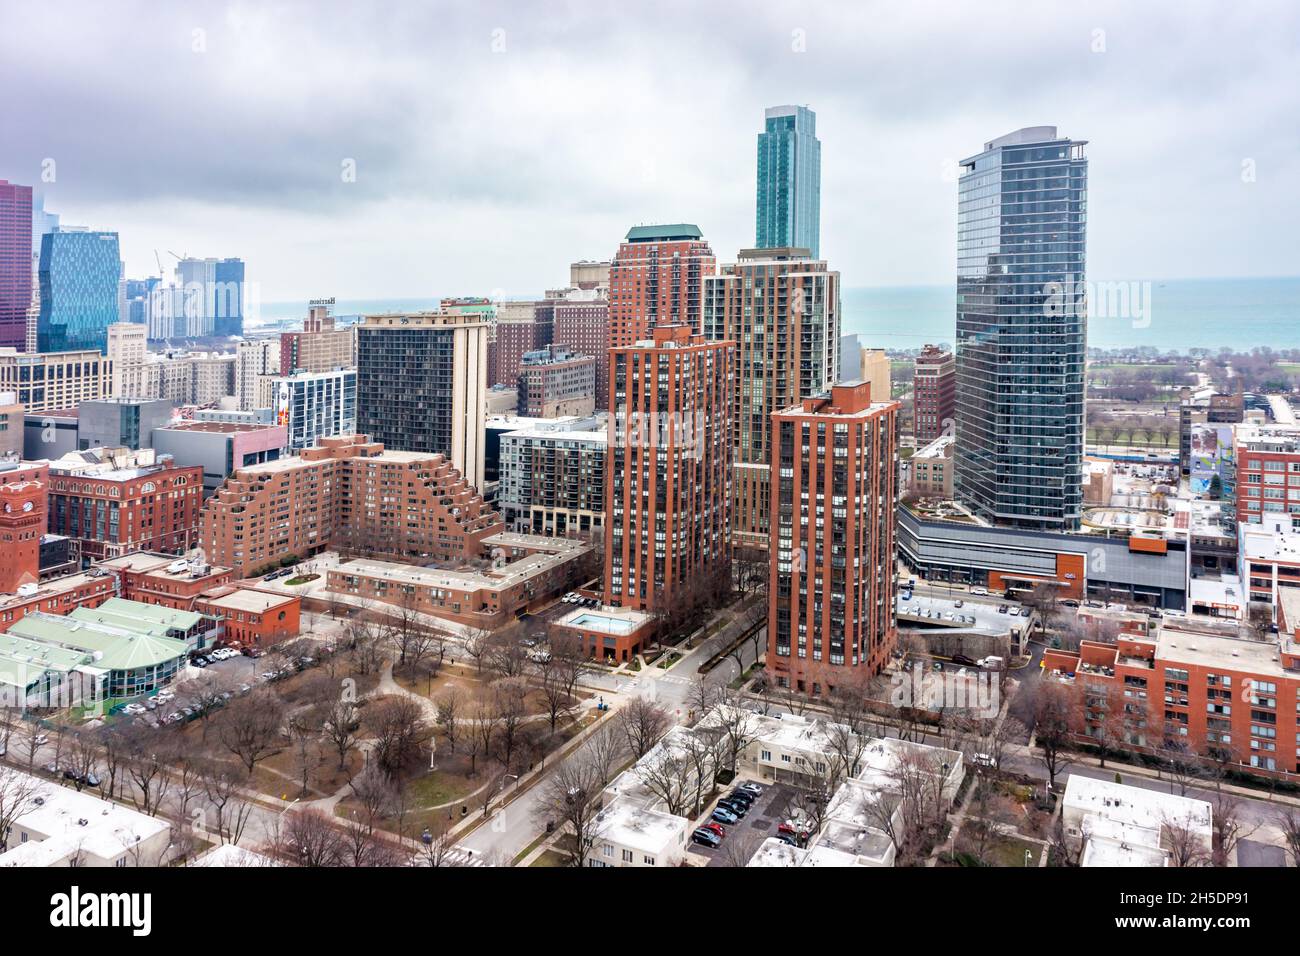 Ariel city view in Chicago of nondescript buildings near Lake Michigaan, showing an overcast Moody sky. Stock Photo